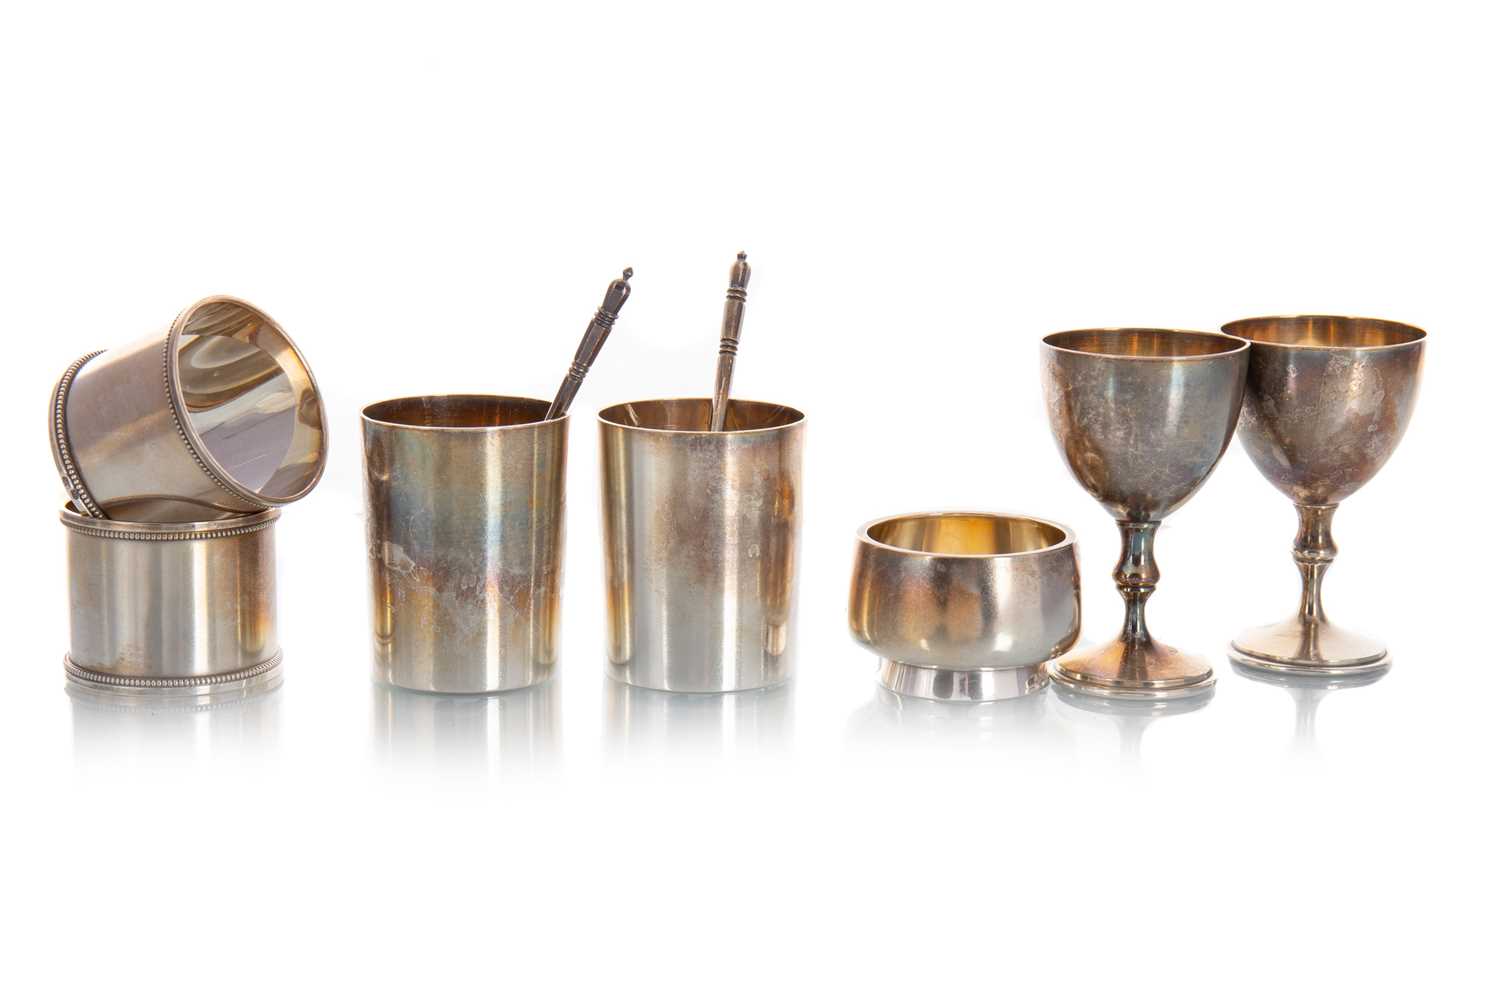 COLLECTION OF RUSSIAN IMPERIAL SILVER, LATE 19TH/EARLY 20TH CENTURY